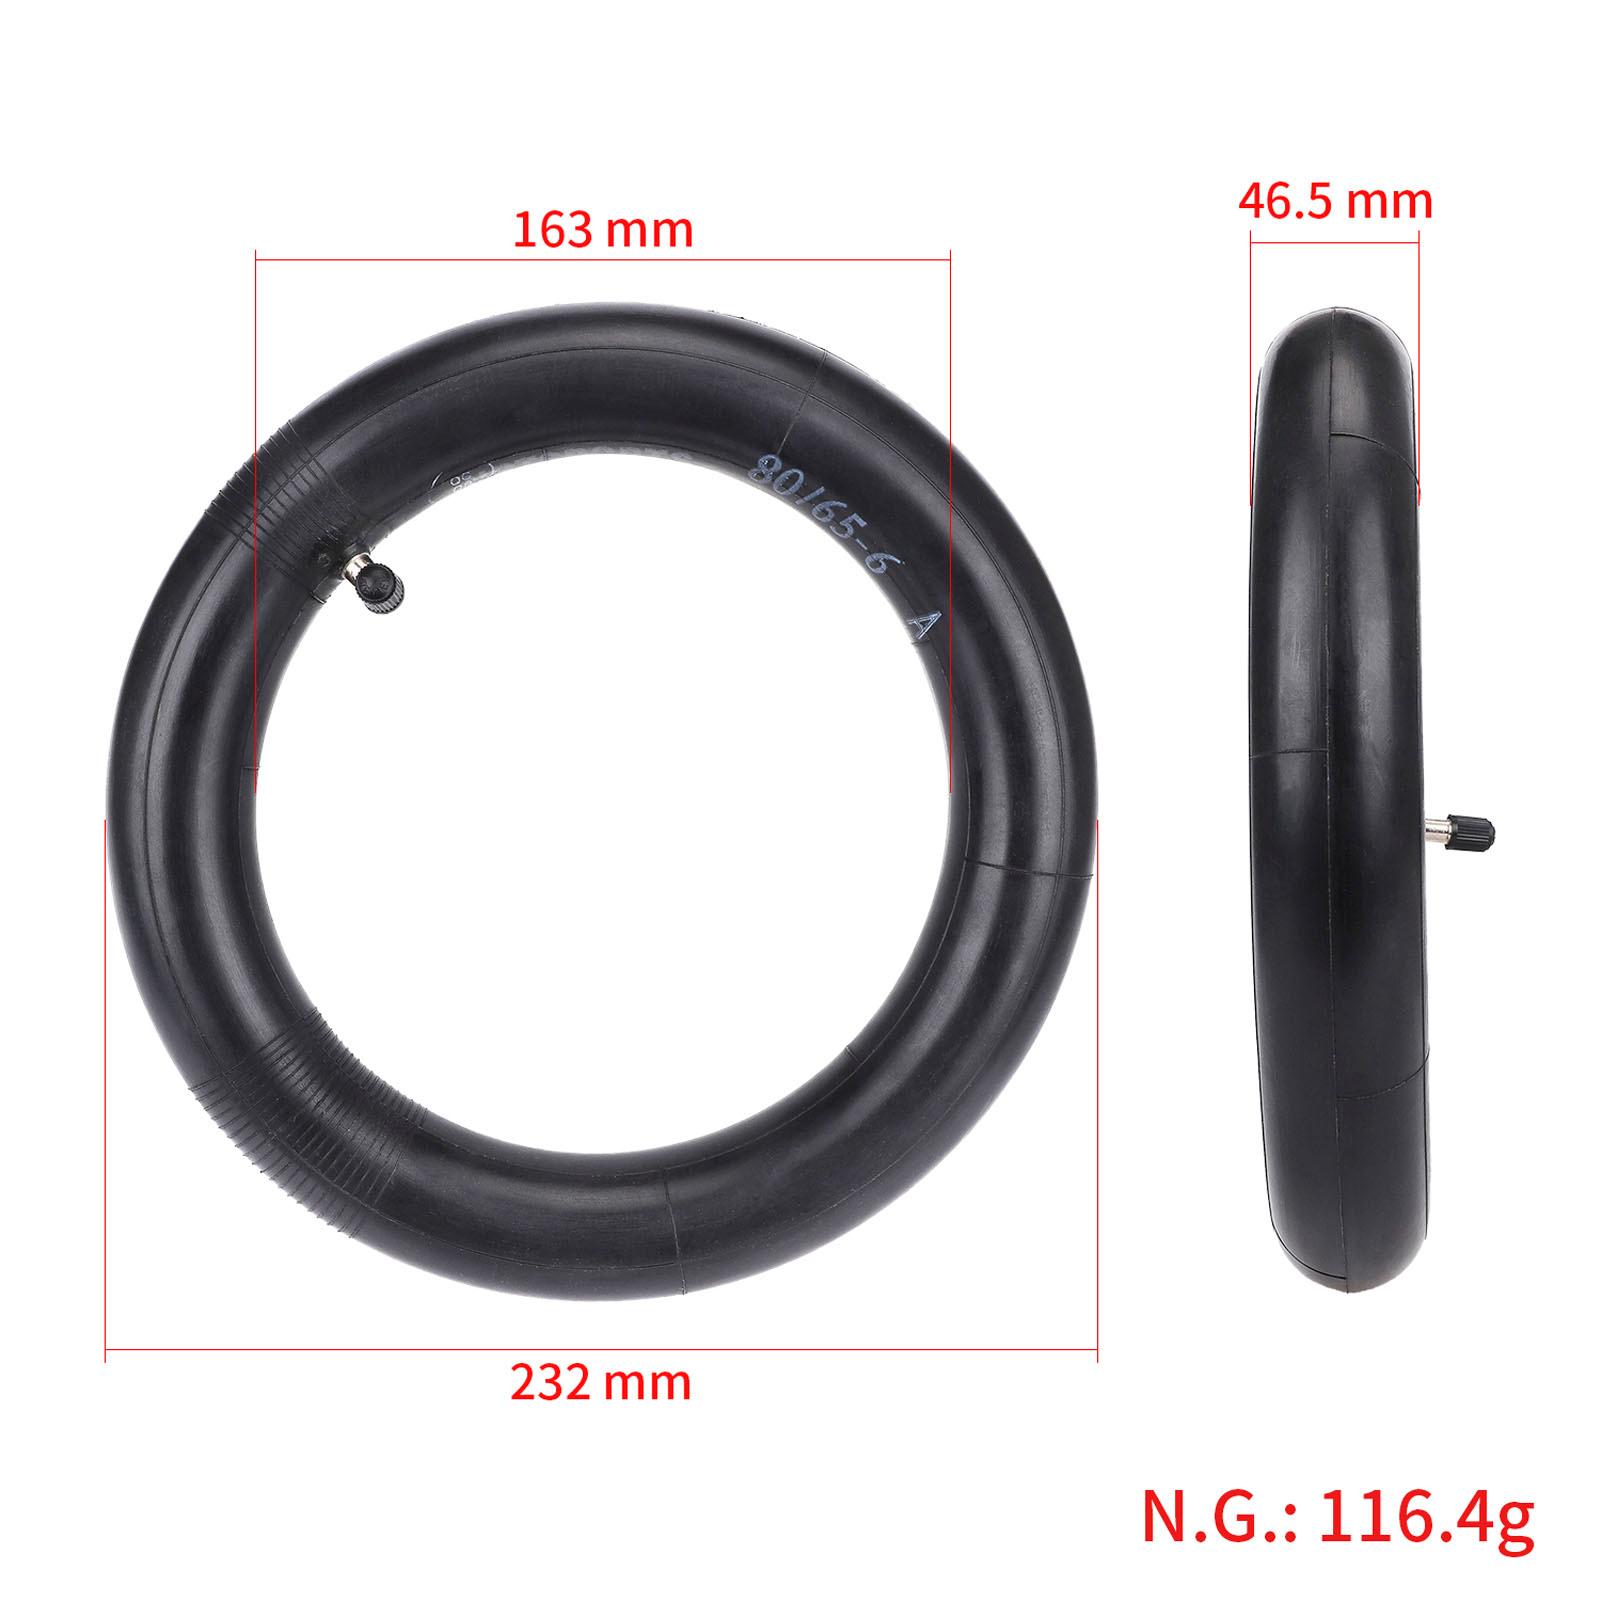 ulip (2 Pack) 255x80 Off Road Tire with Inner Tube Pneumatic Tyre